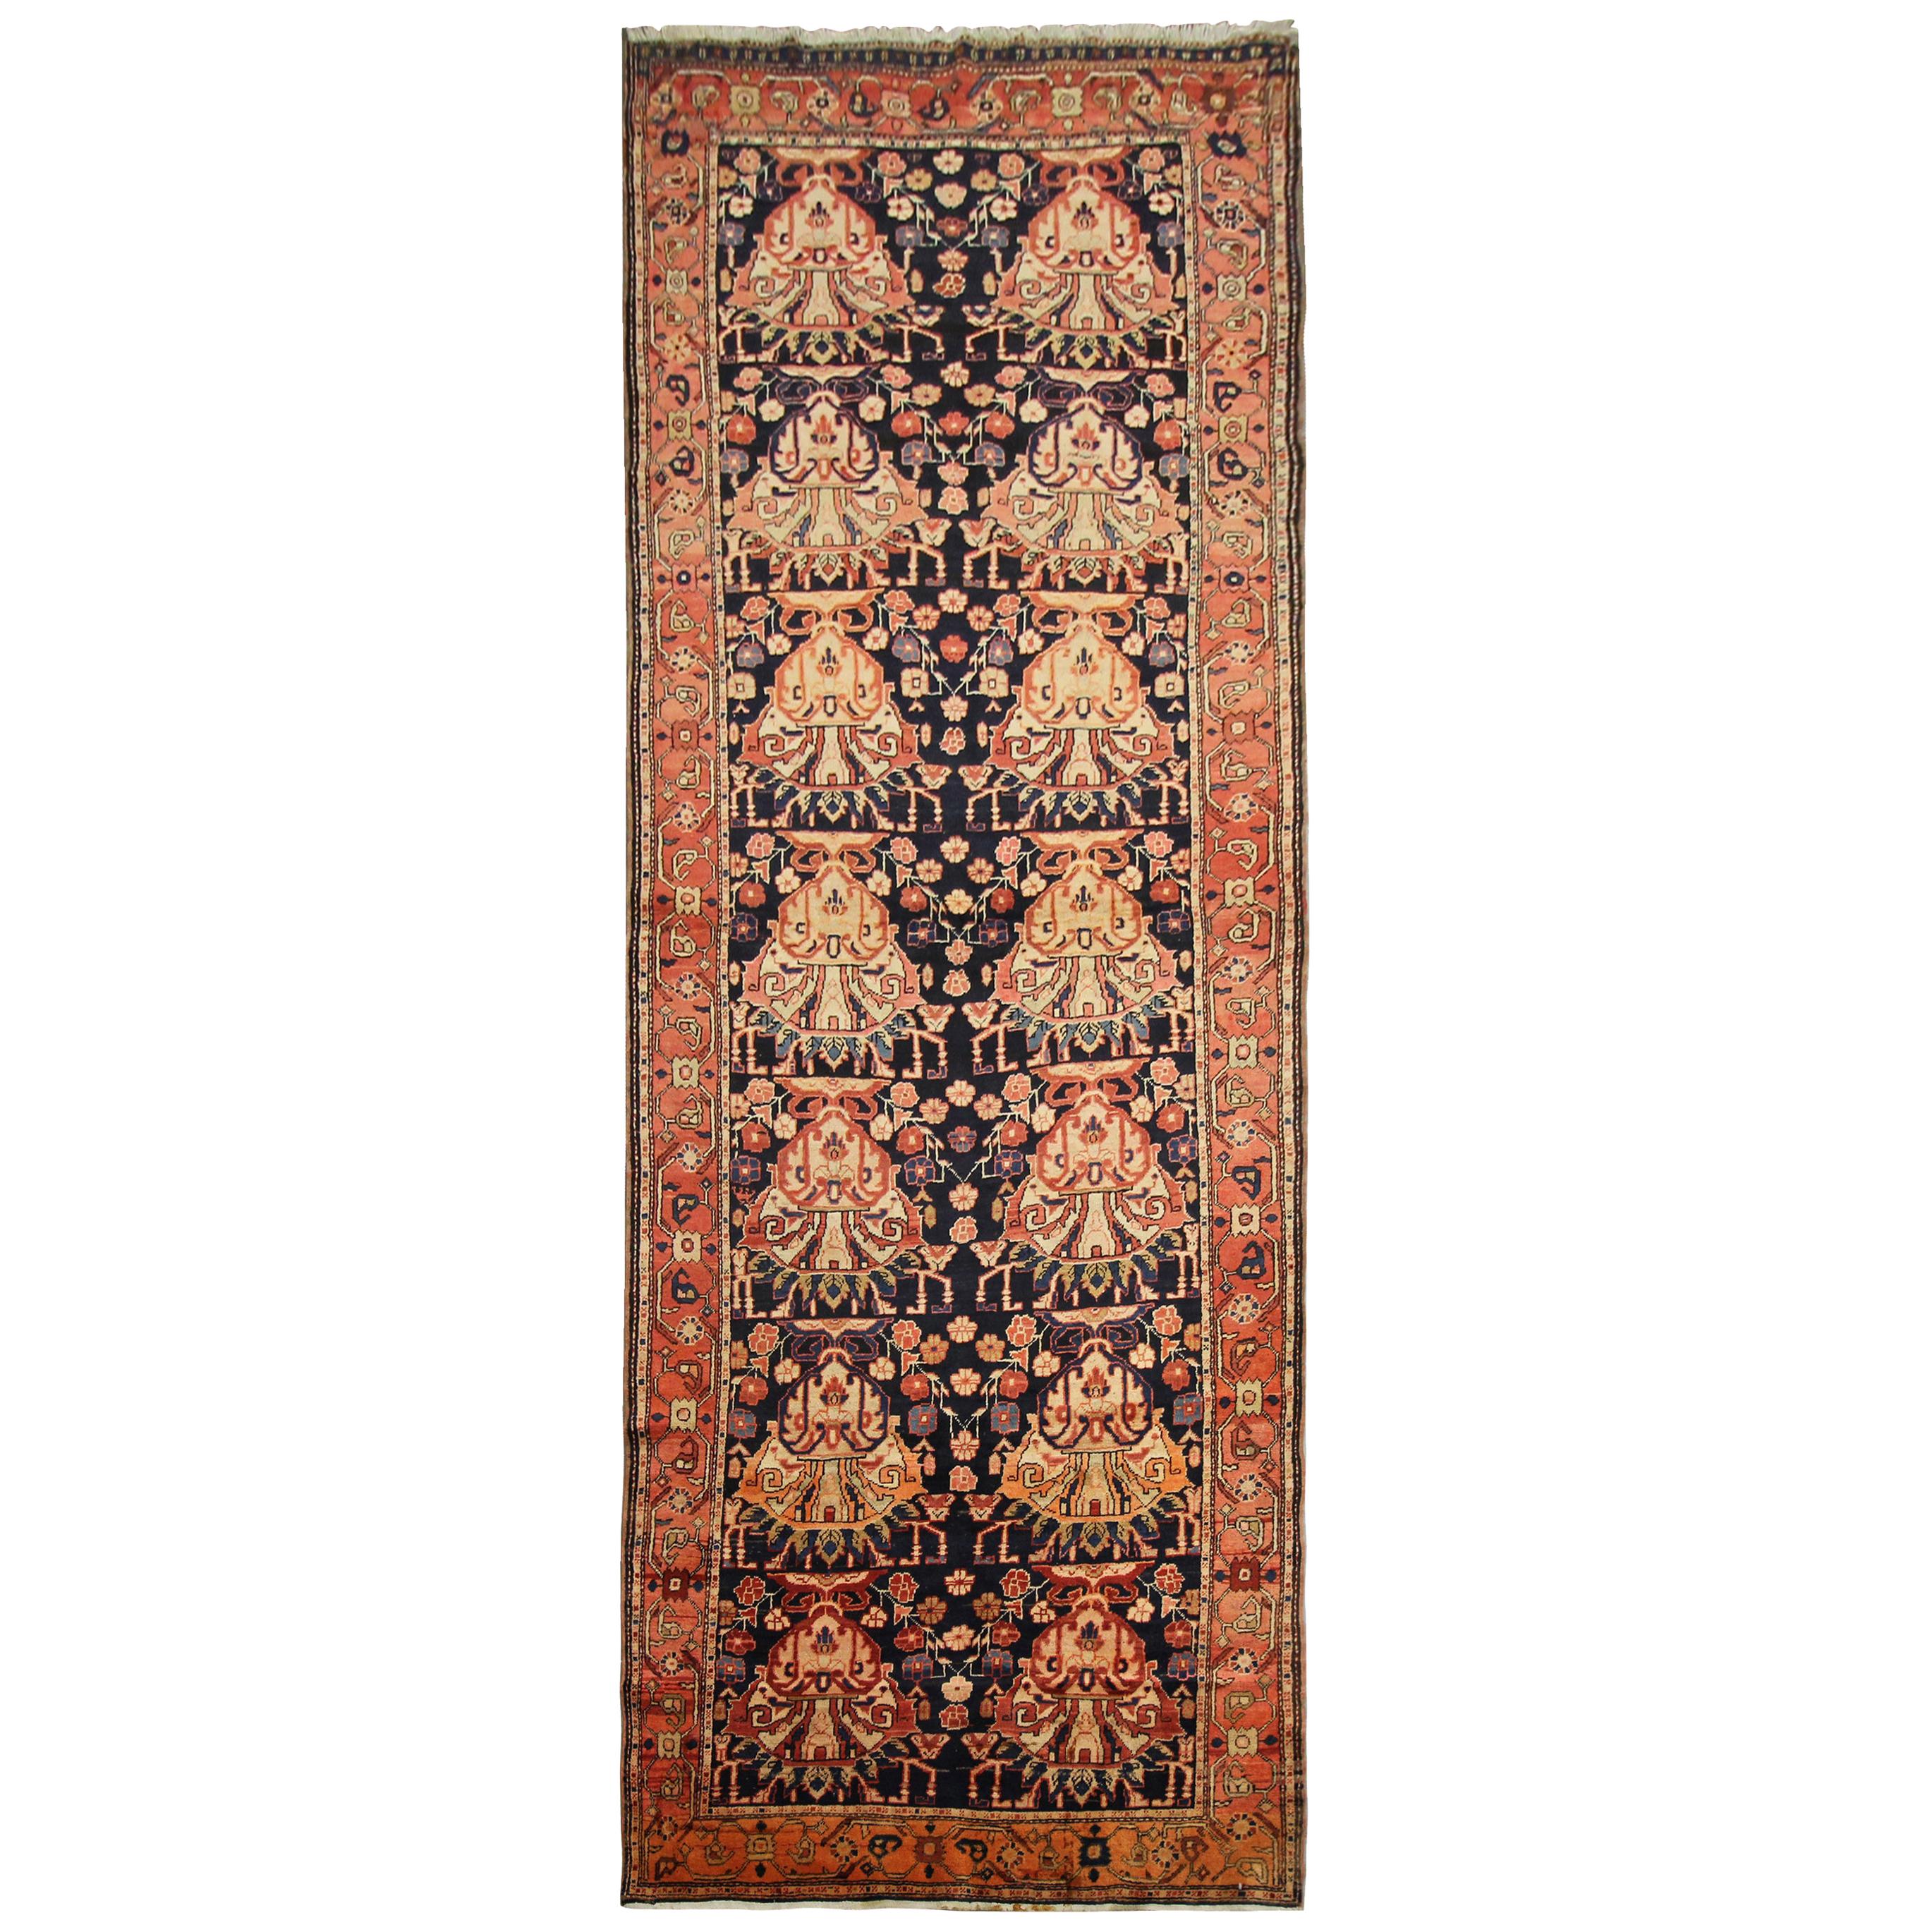 Handwoven Antique Runner Rug, Oriental Traditional Red Wool Carpet